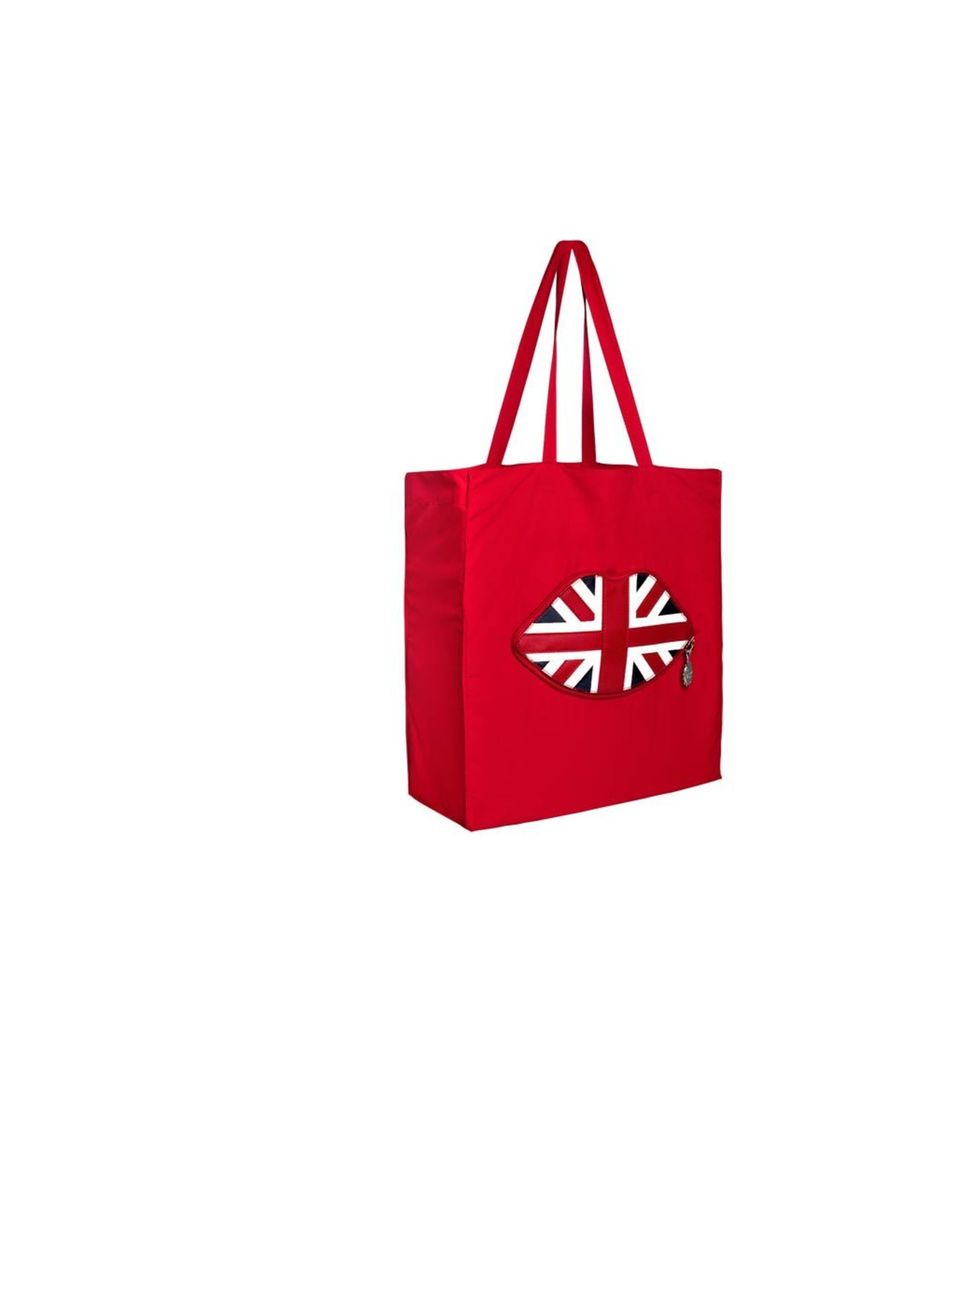 <p><a href="http://www.luluguinness.com/ProductPage.aspx?productId=LUGG-300-001-106">Lulu Guinness</a> Union Jack foldaway tote, £45</p>